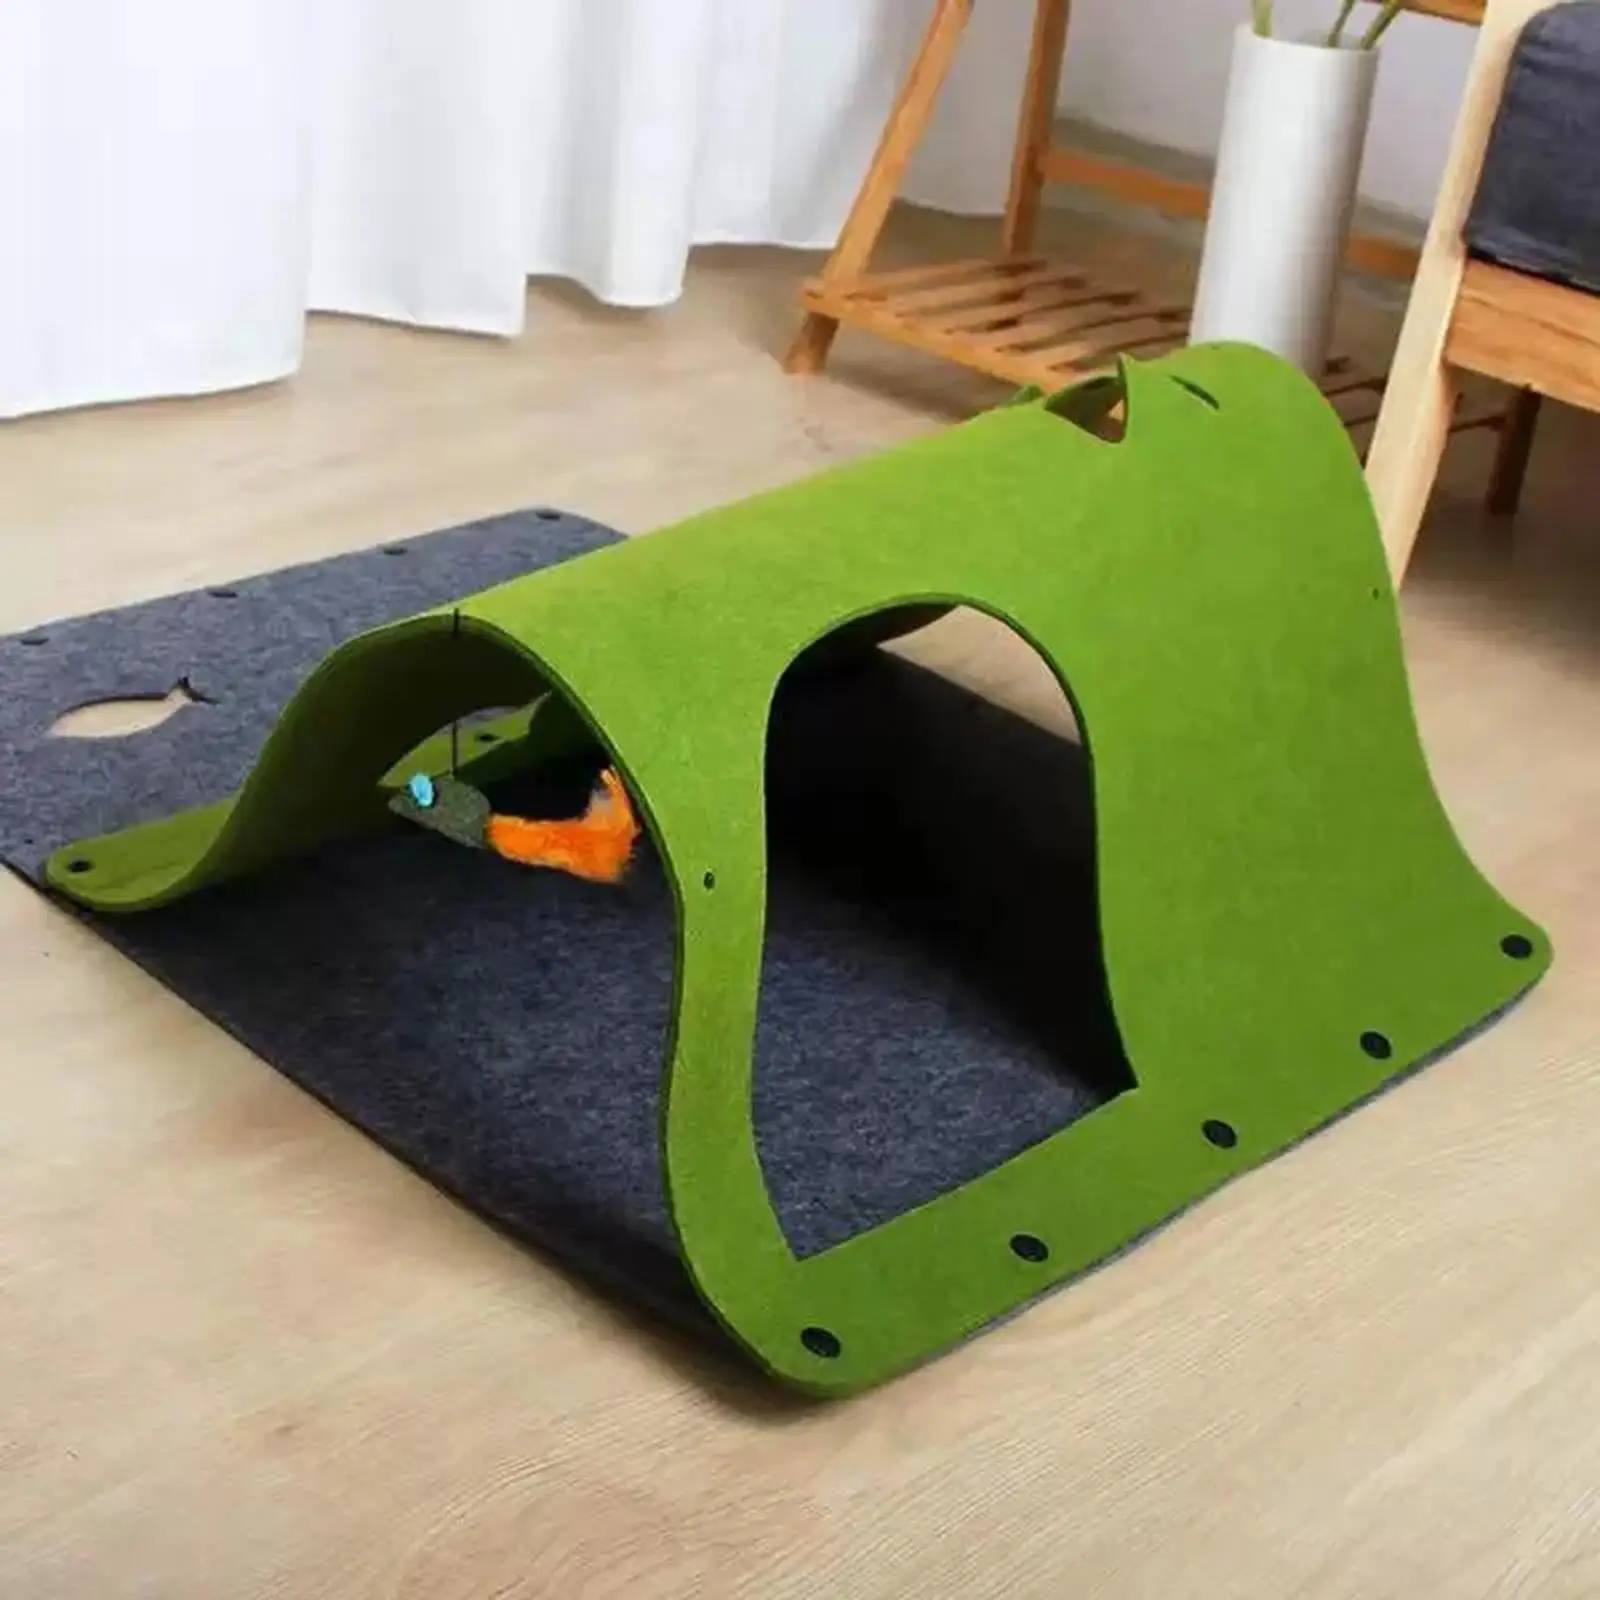 Felt Cat Tunnel for Indoor Cats with Hanging Mouse Foldable Activity Rug Play Mat Playing Tube for Kitten Exercise Rabbit Hides